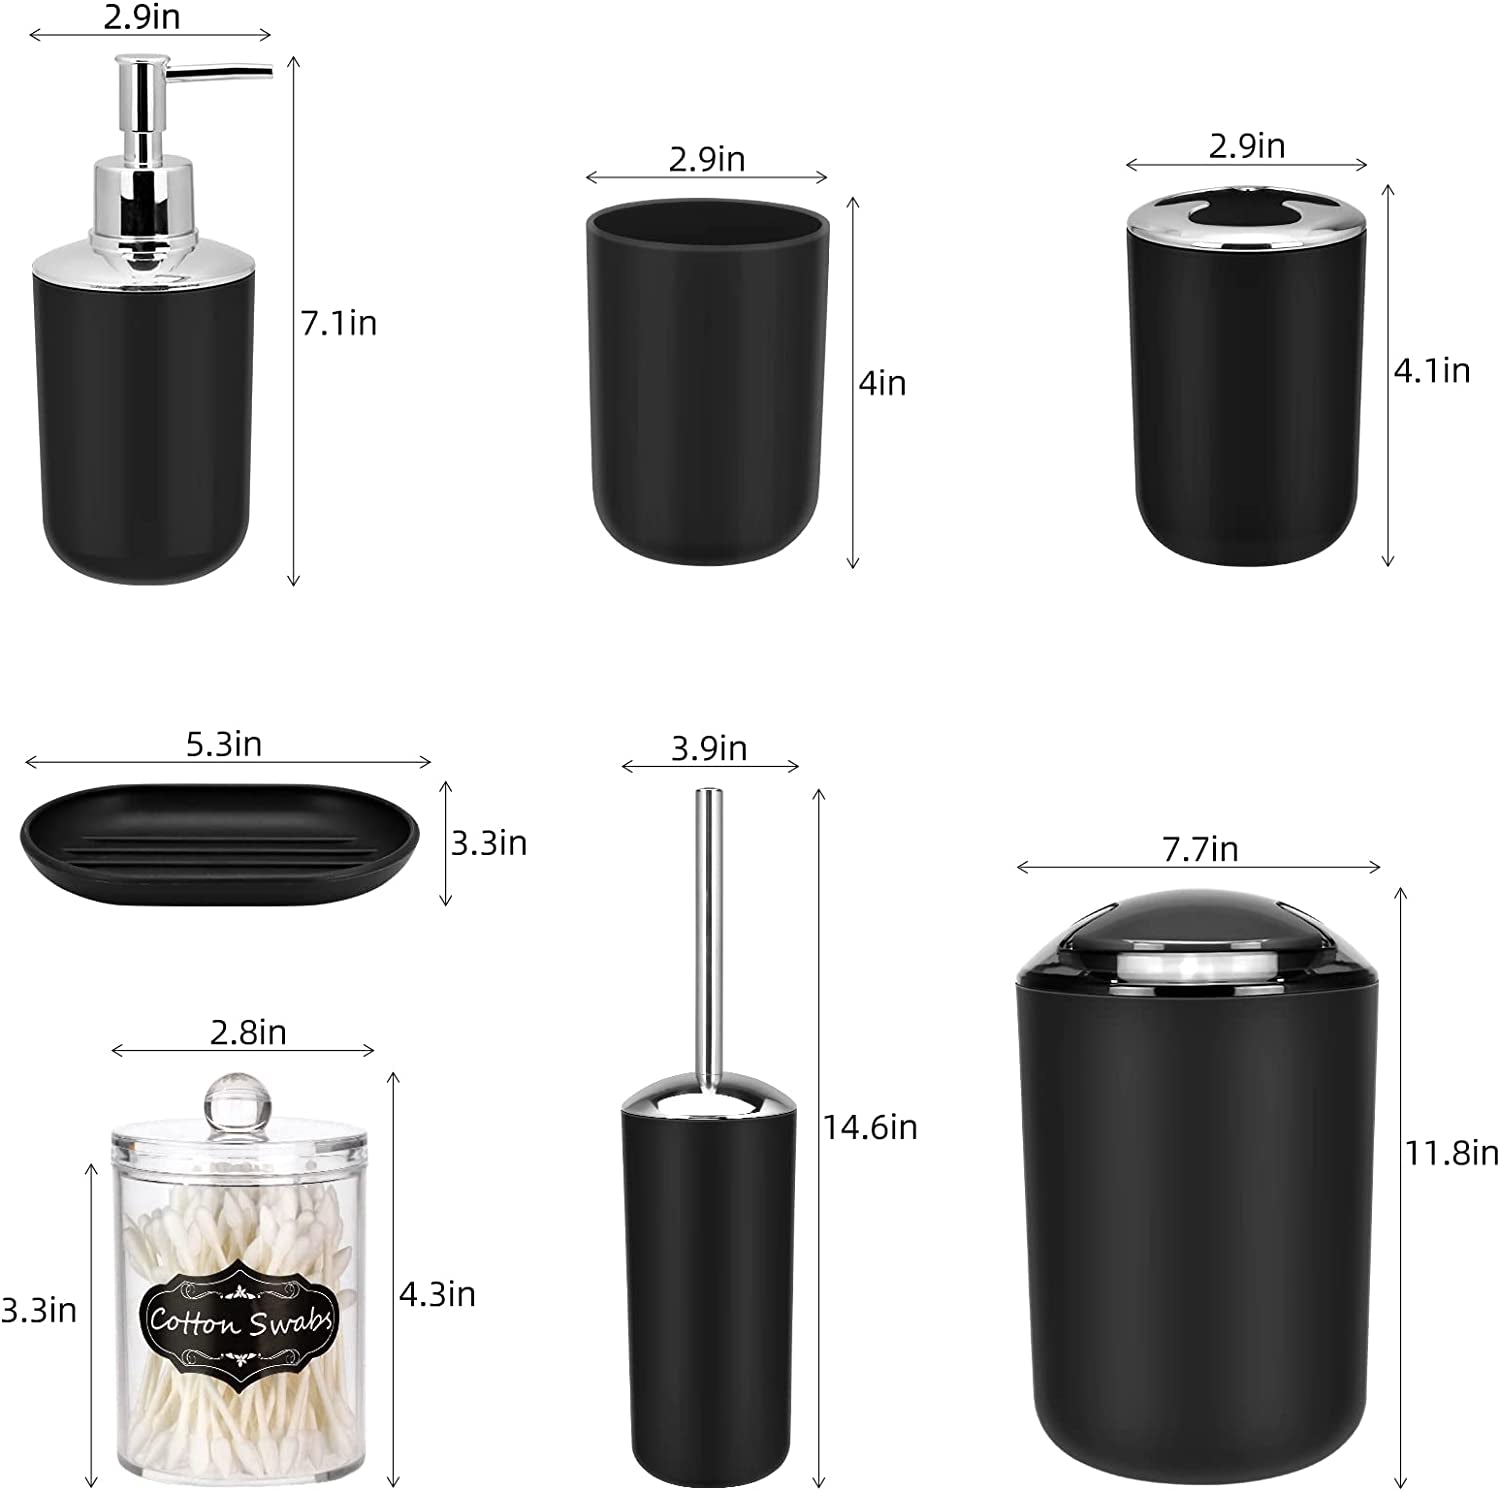 Bathroom Accessory Set - 8 Pcs Black Bathroom Accessories Set with Trash Can, Soap Dispenser, Soap Dish, Toothbrush Holder, Toothbrush Cup, Toilet Brush Holder, Qtip Holder Dispenser with Labels